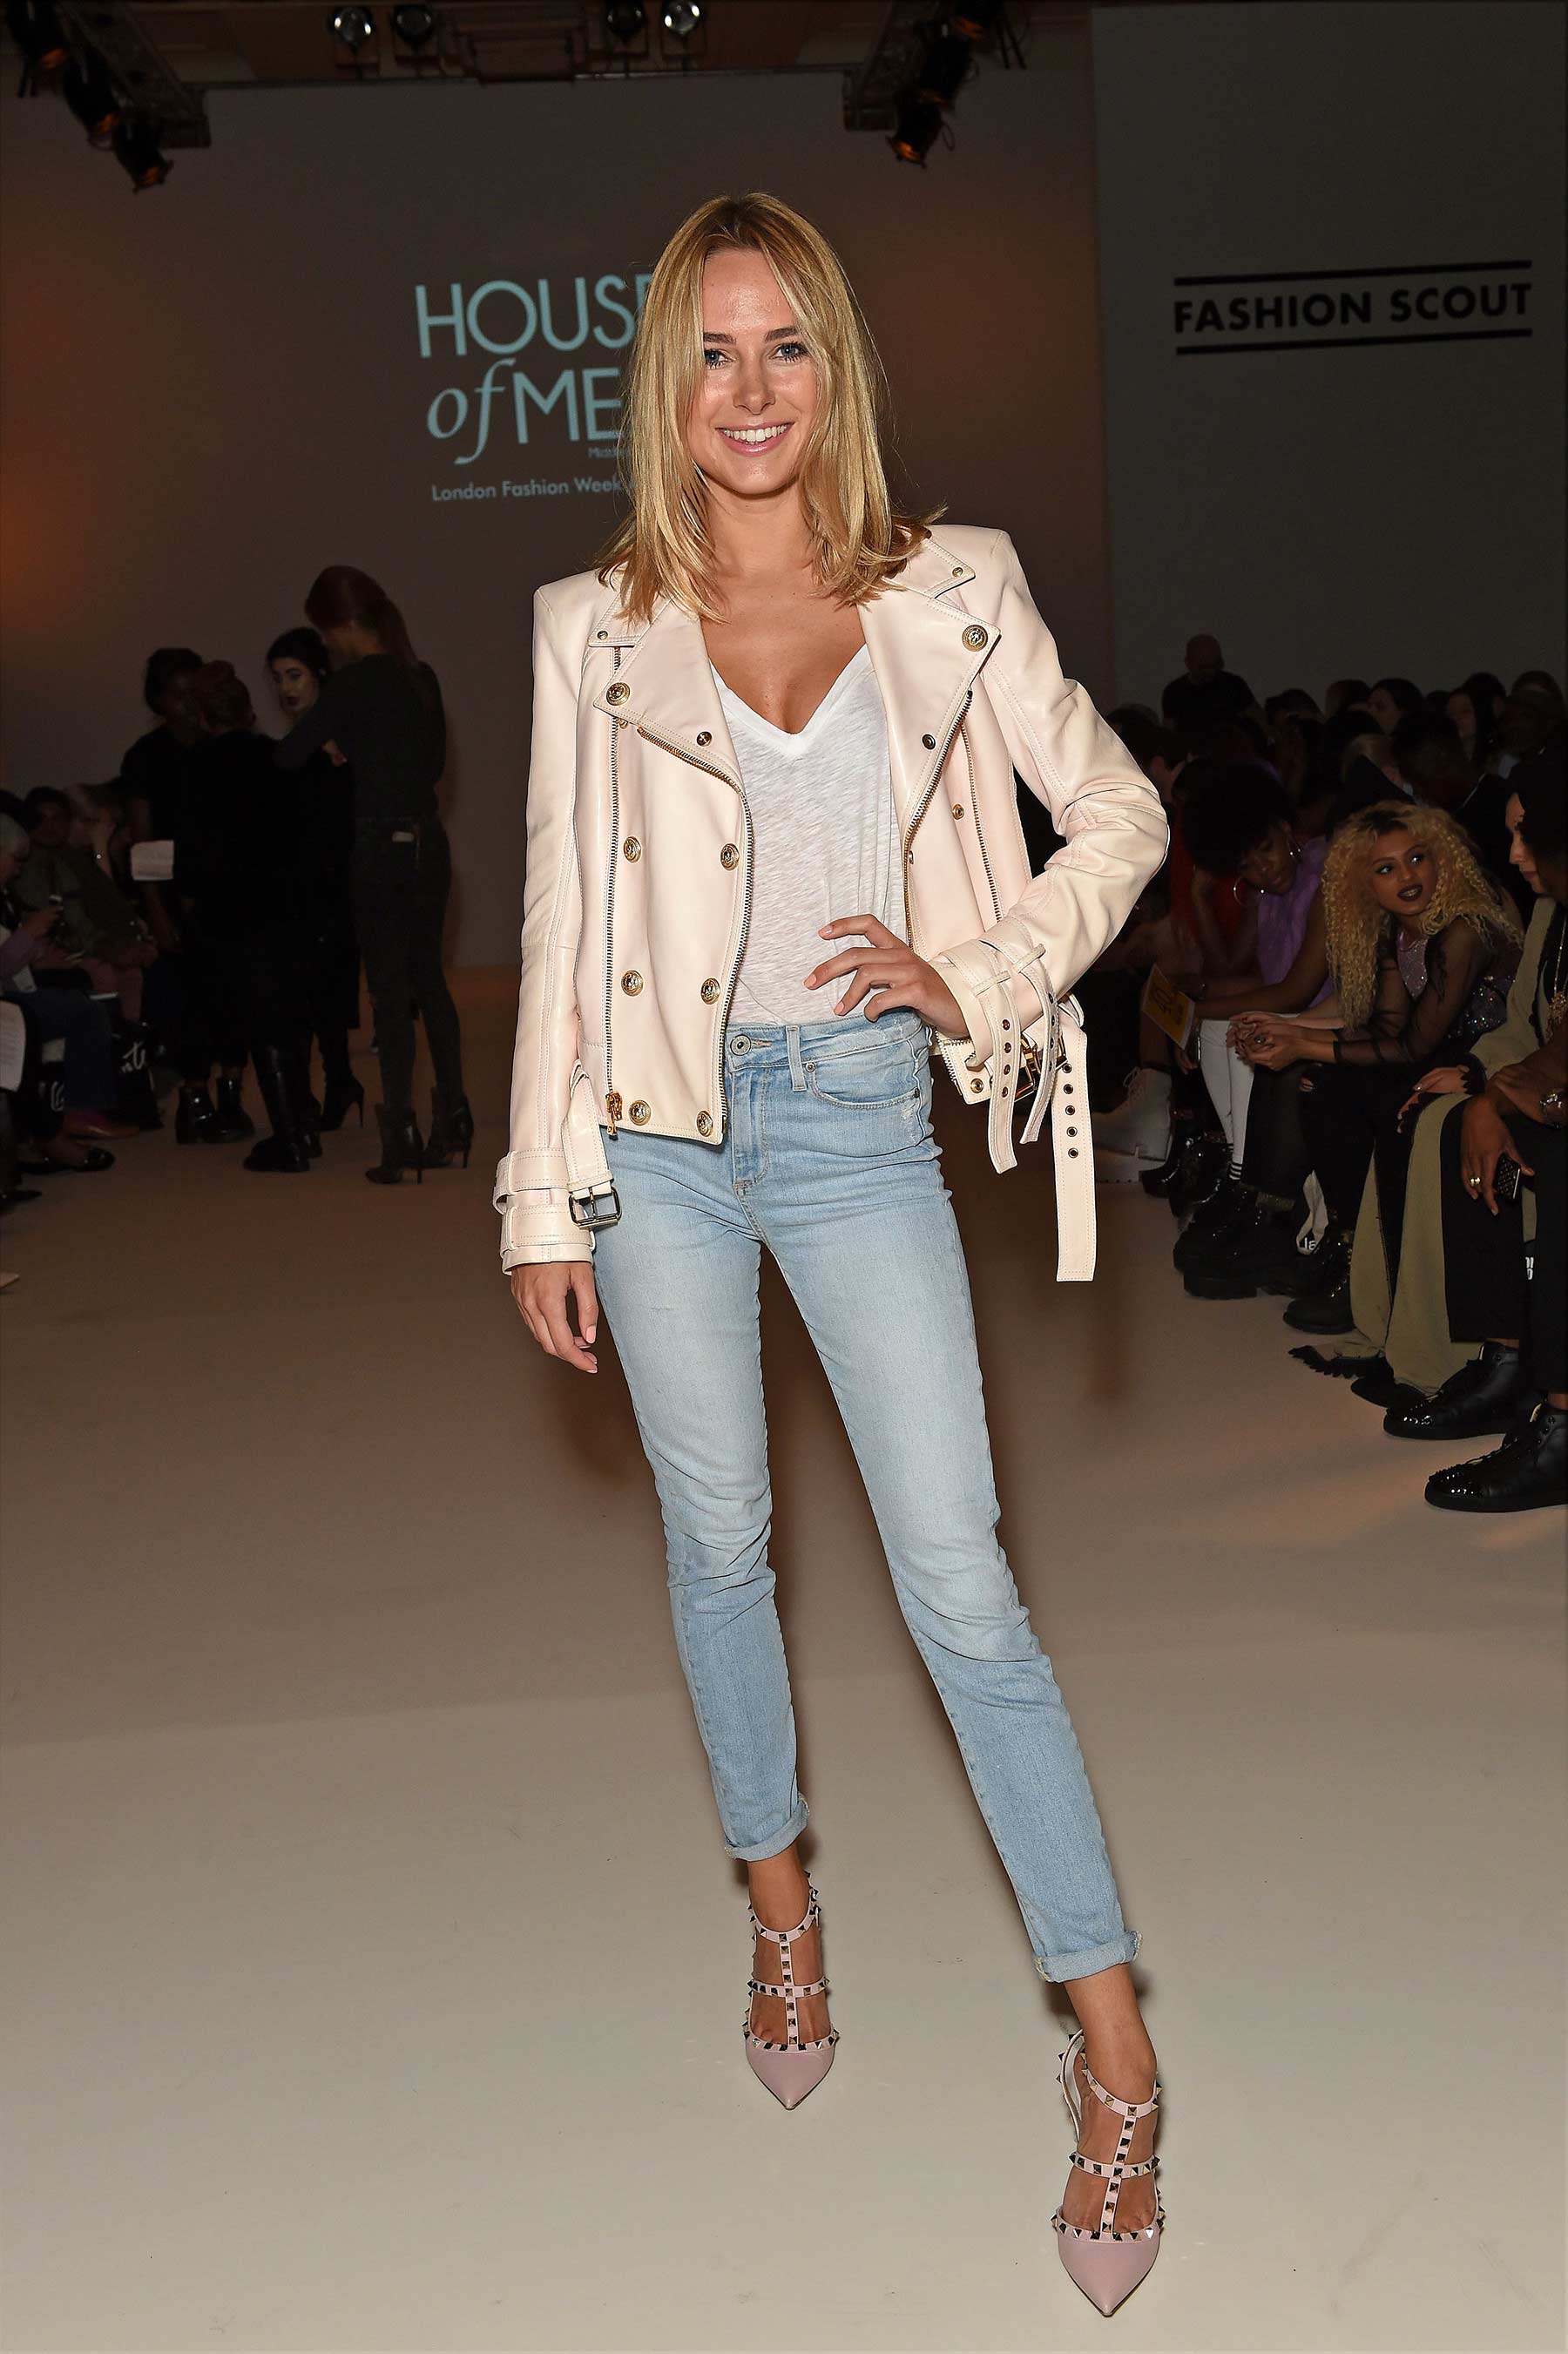 Kimberley Garner attends Middle East Show